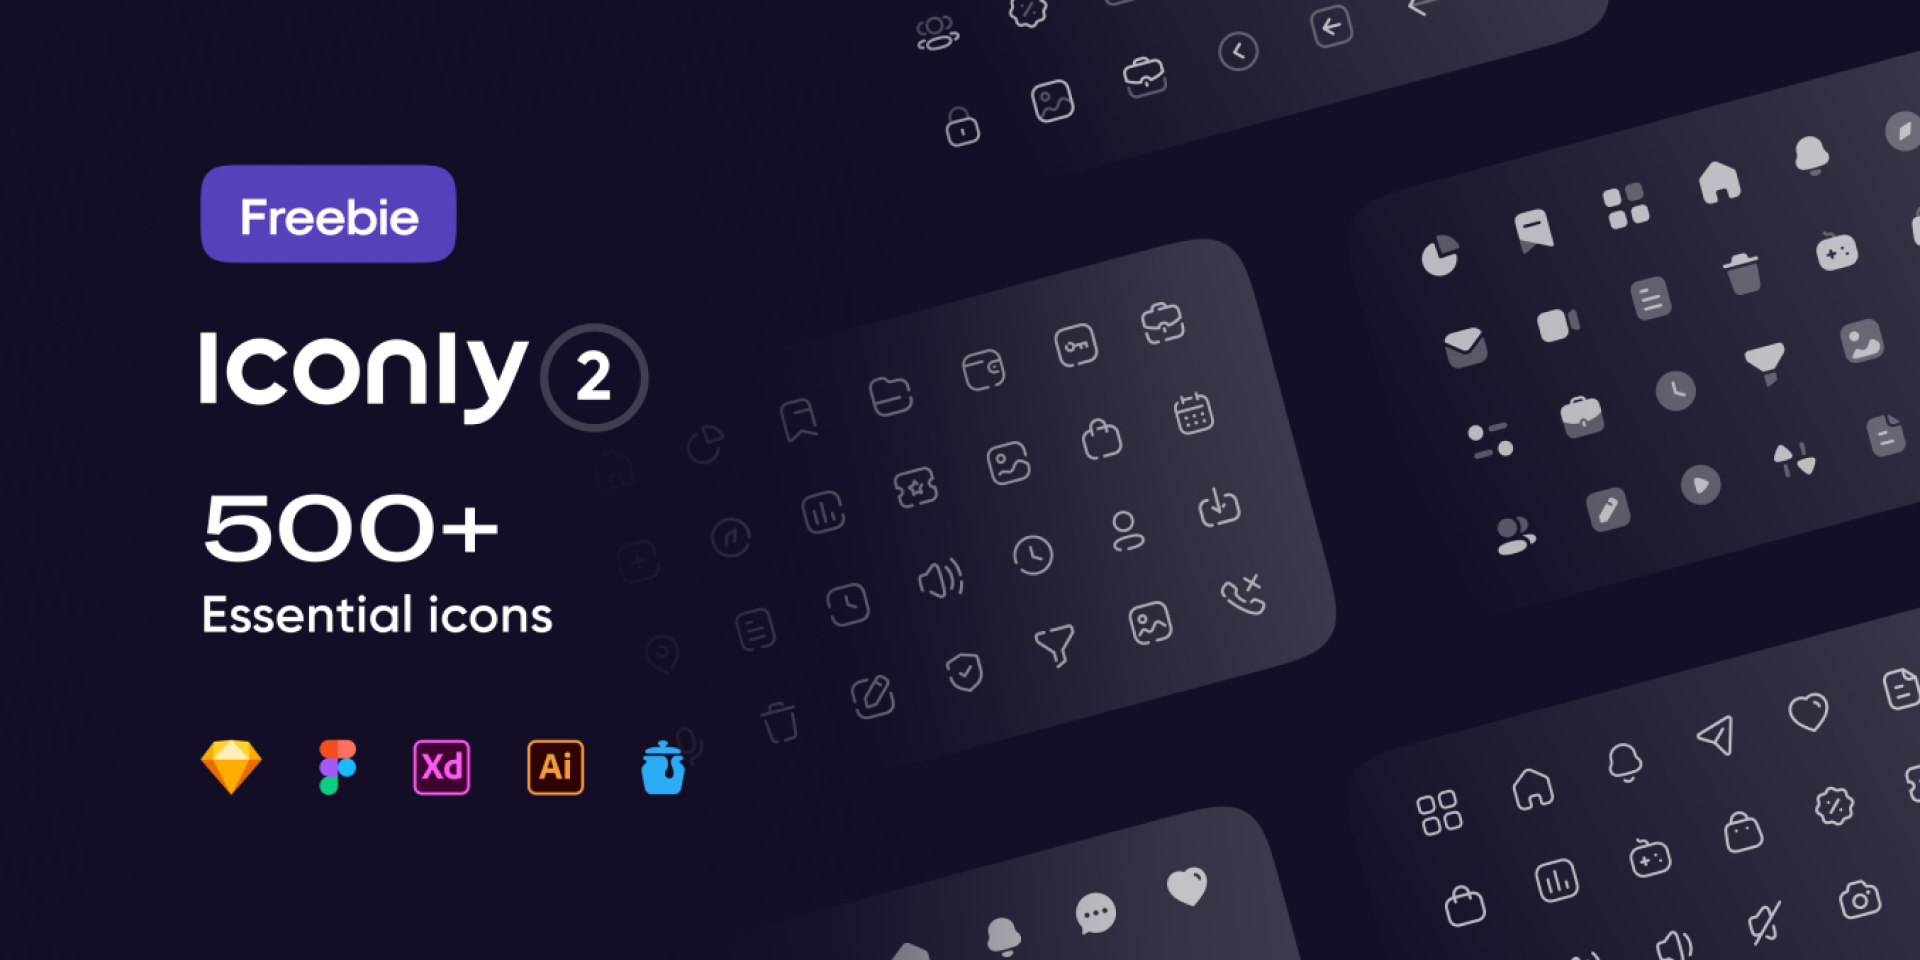 Iconly 2 - Essential icons